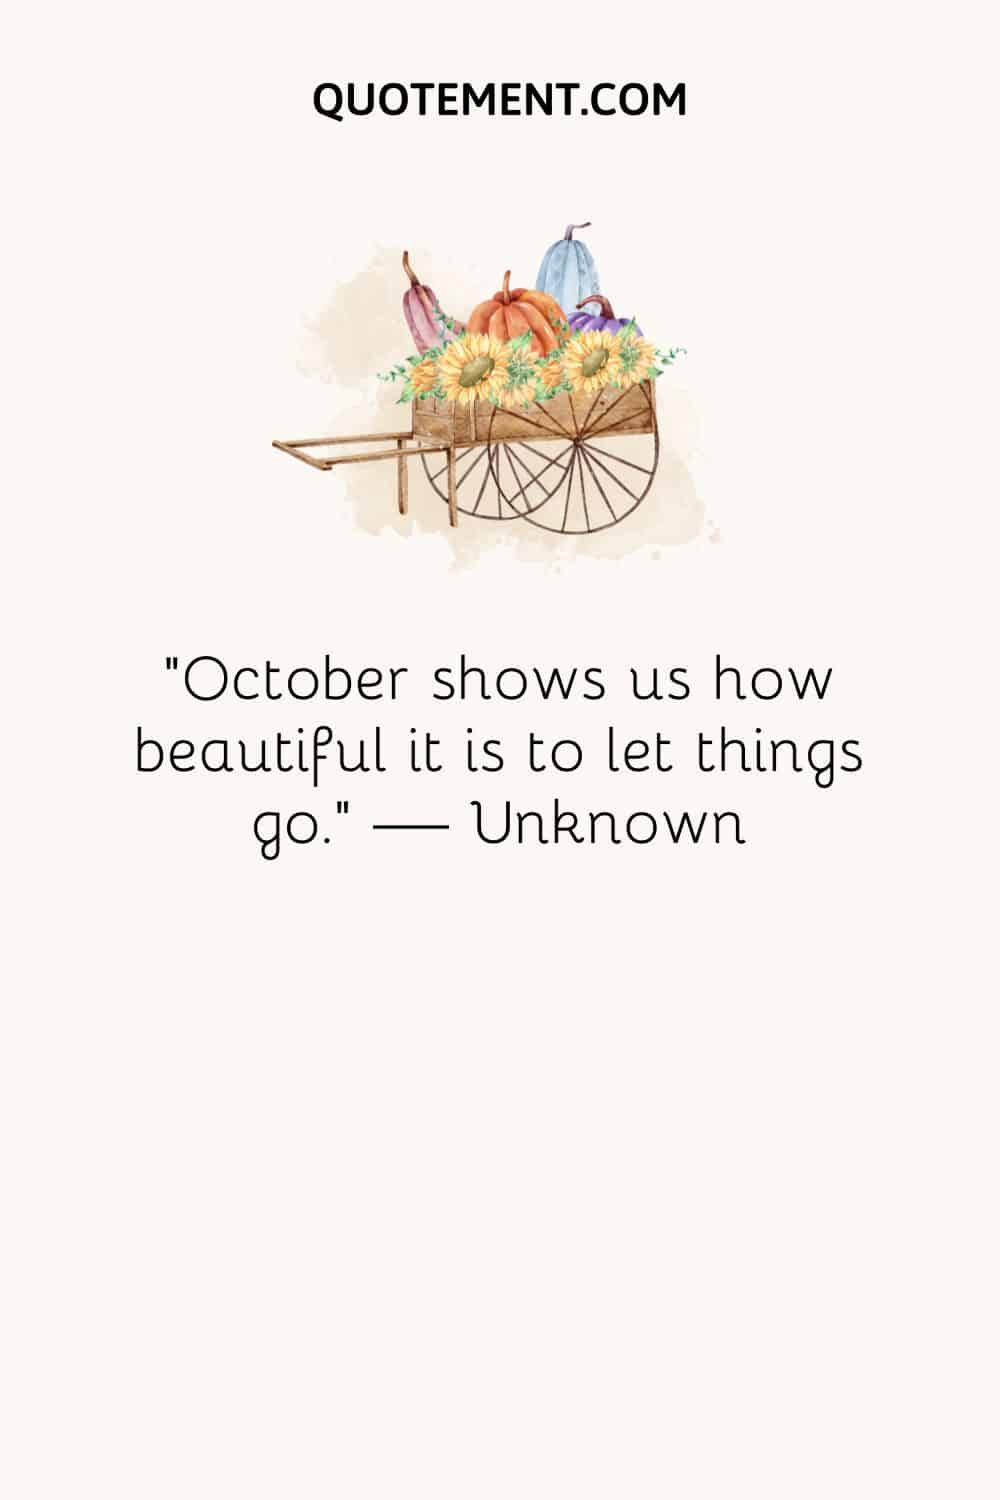 October shows us how beautiful it is to let things go